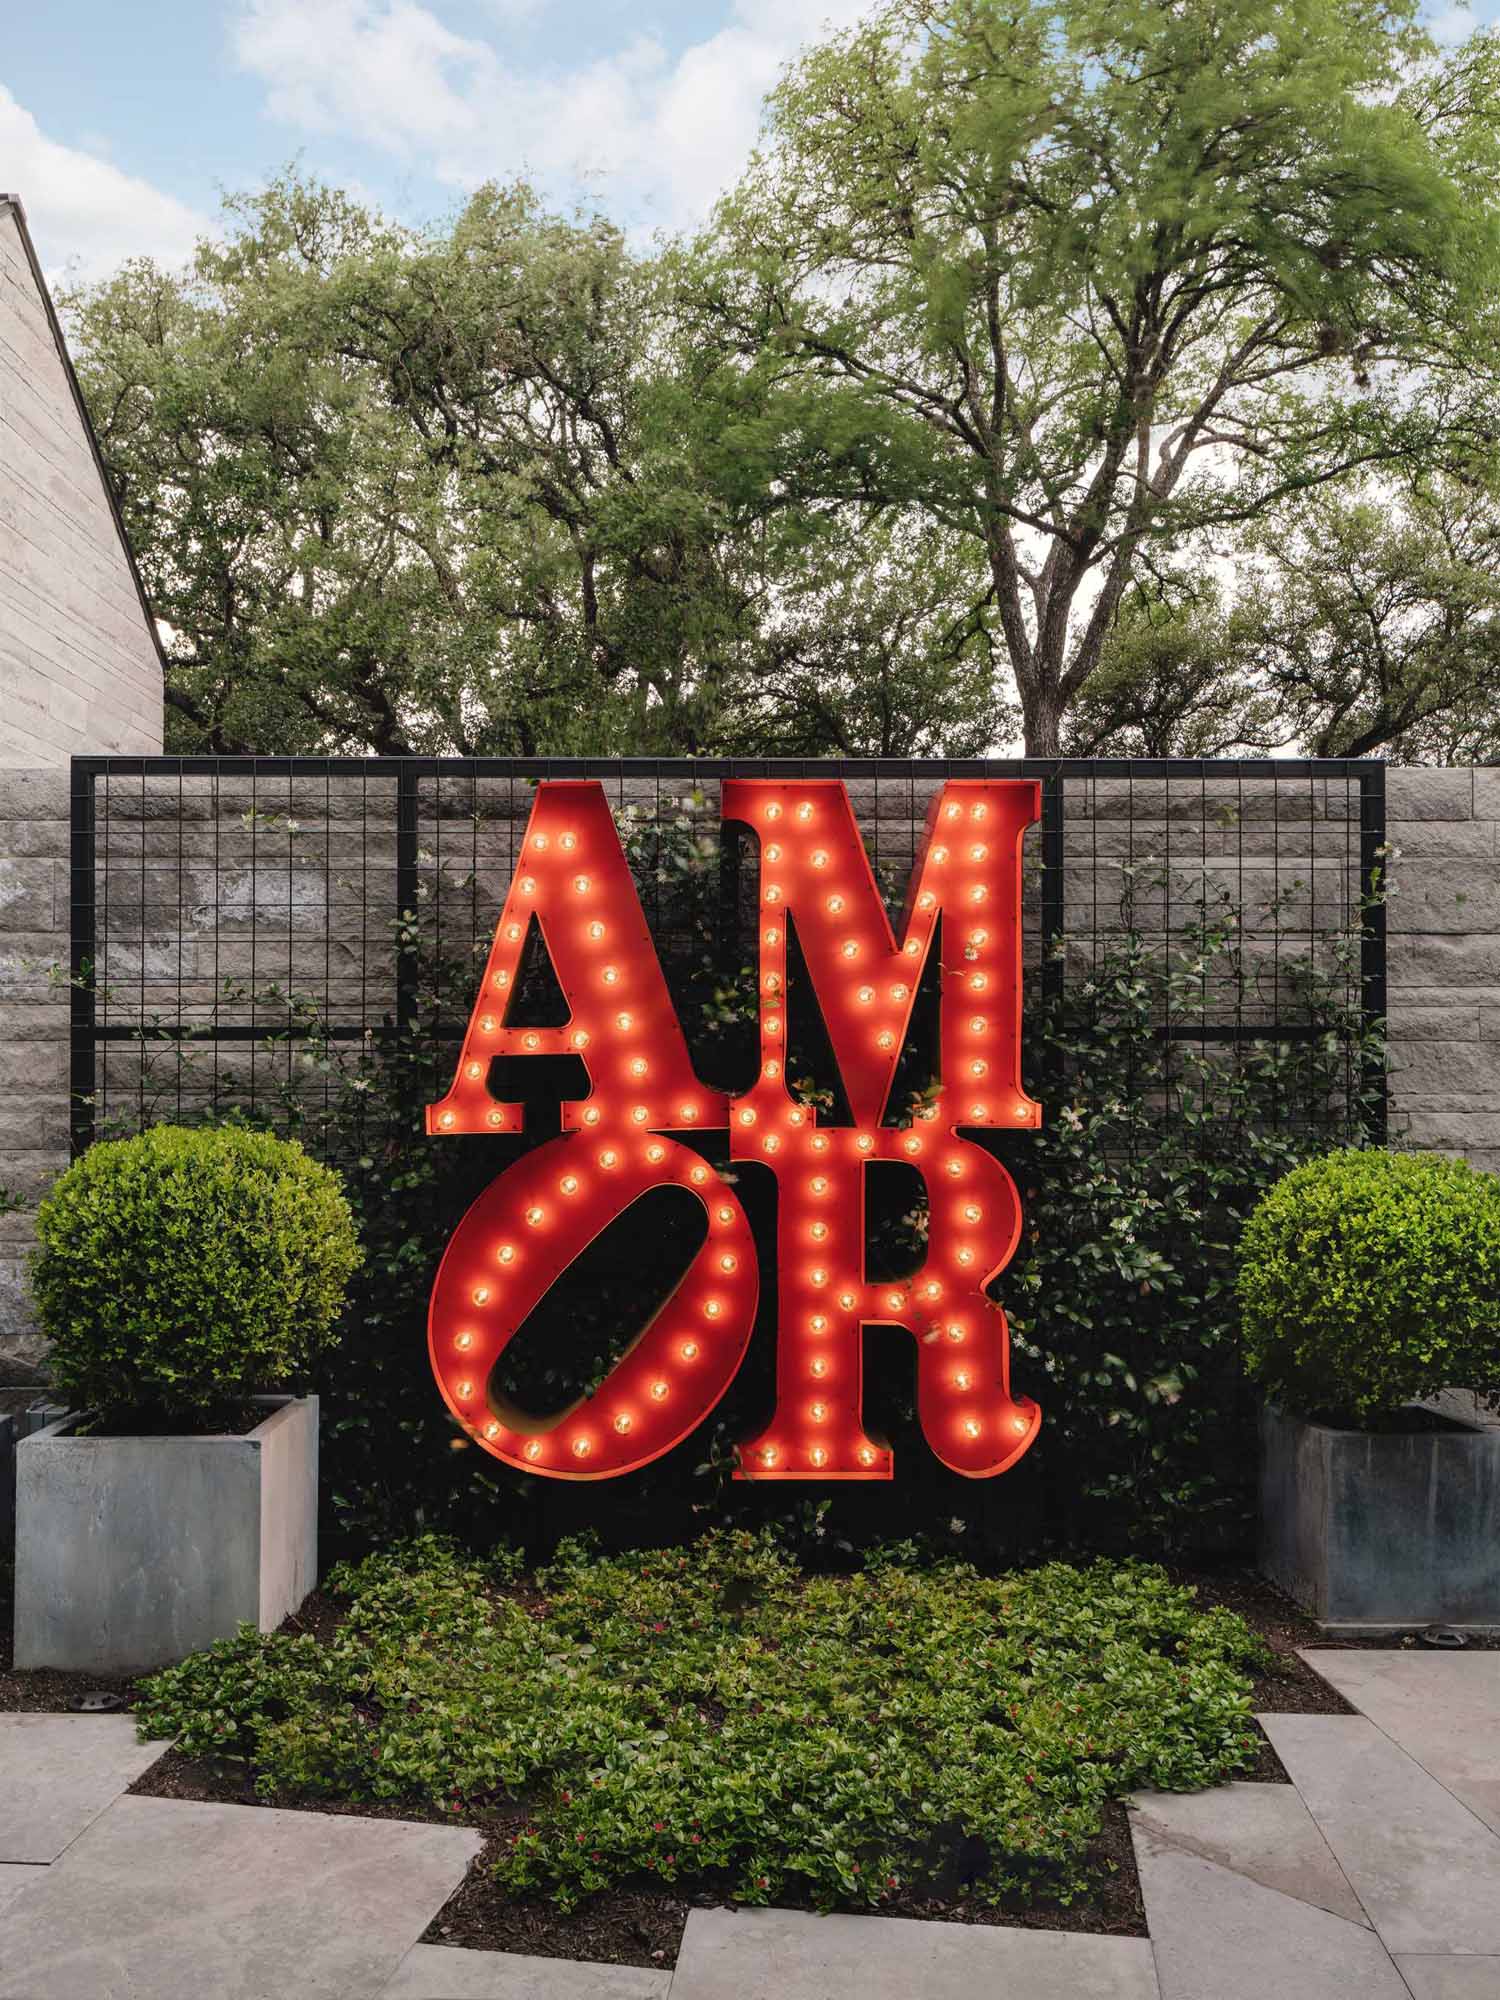 A discreet courtyard leads into the main ،use and features a bistro dining area and a custom ‘amor’ metal sign (inspired by the original iconic sculpture by Robert Indiana).